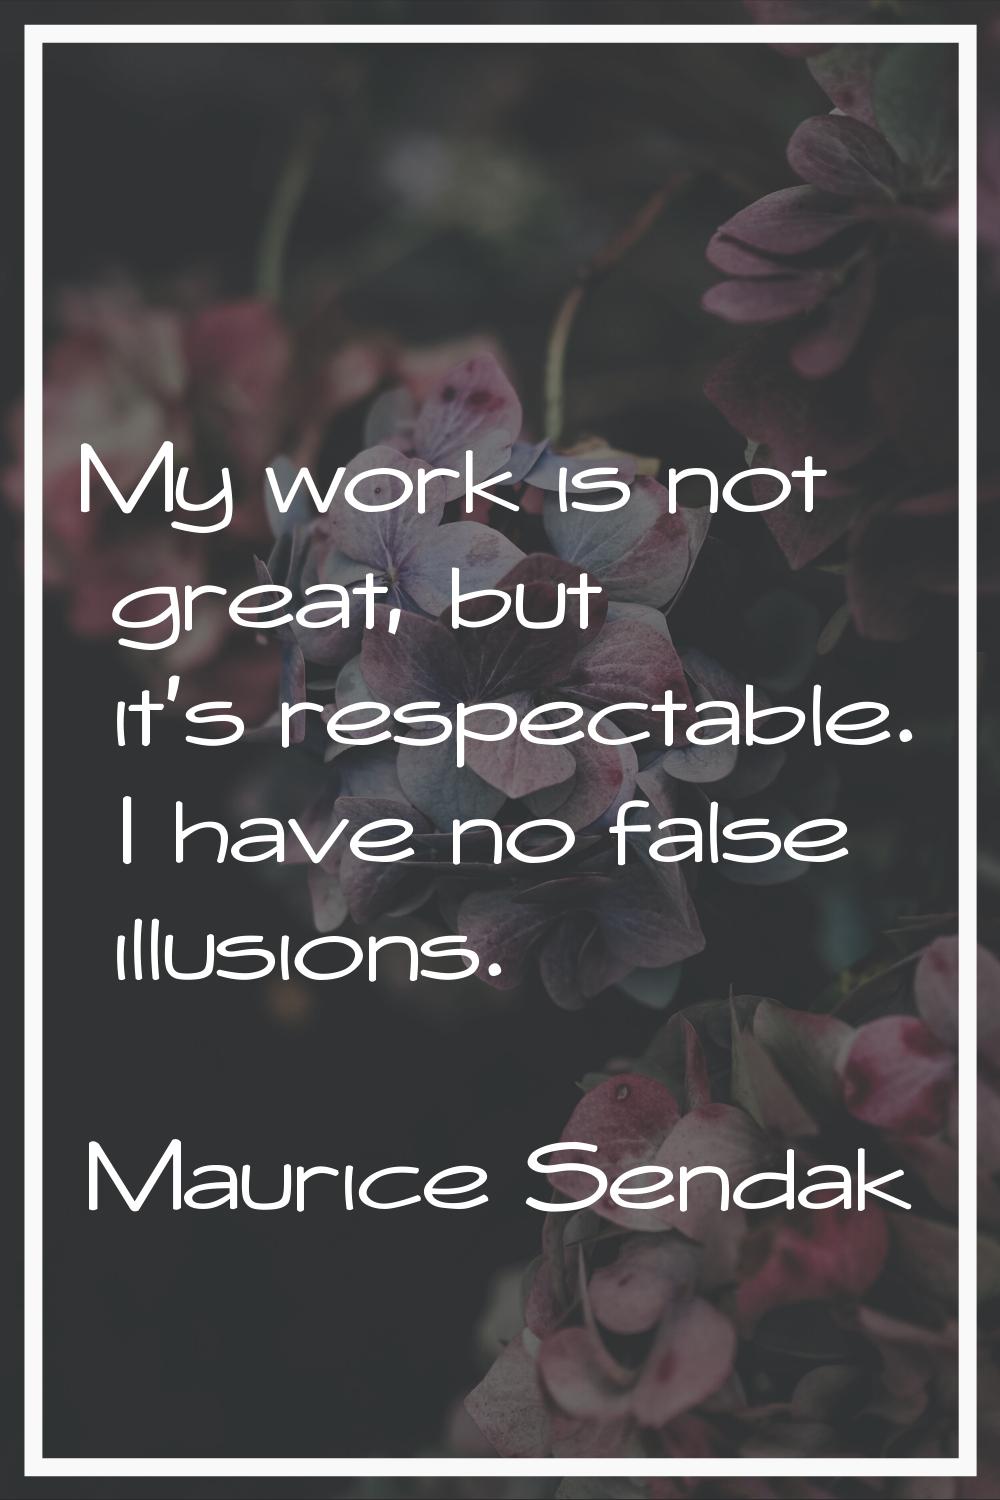 My work is not great, but it's respectable. I have no false illusions.